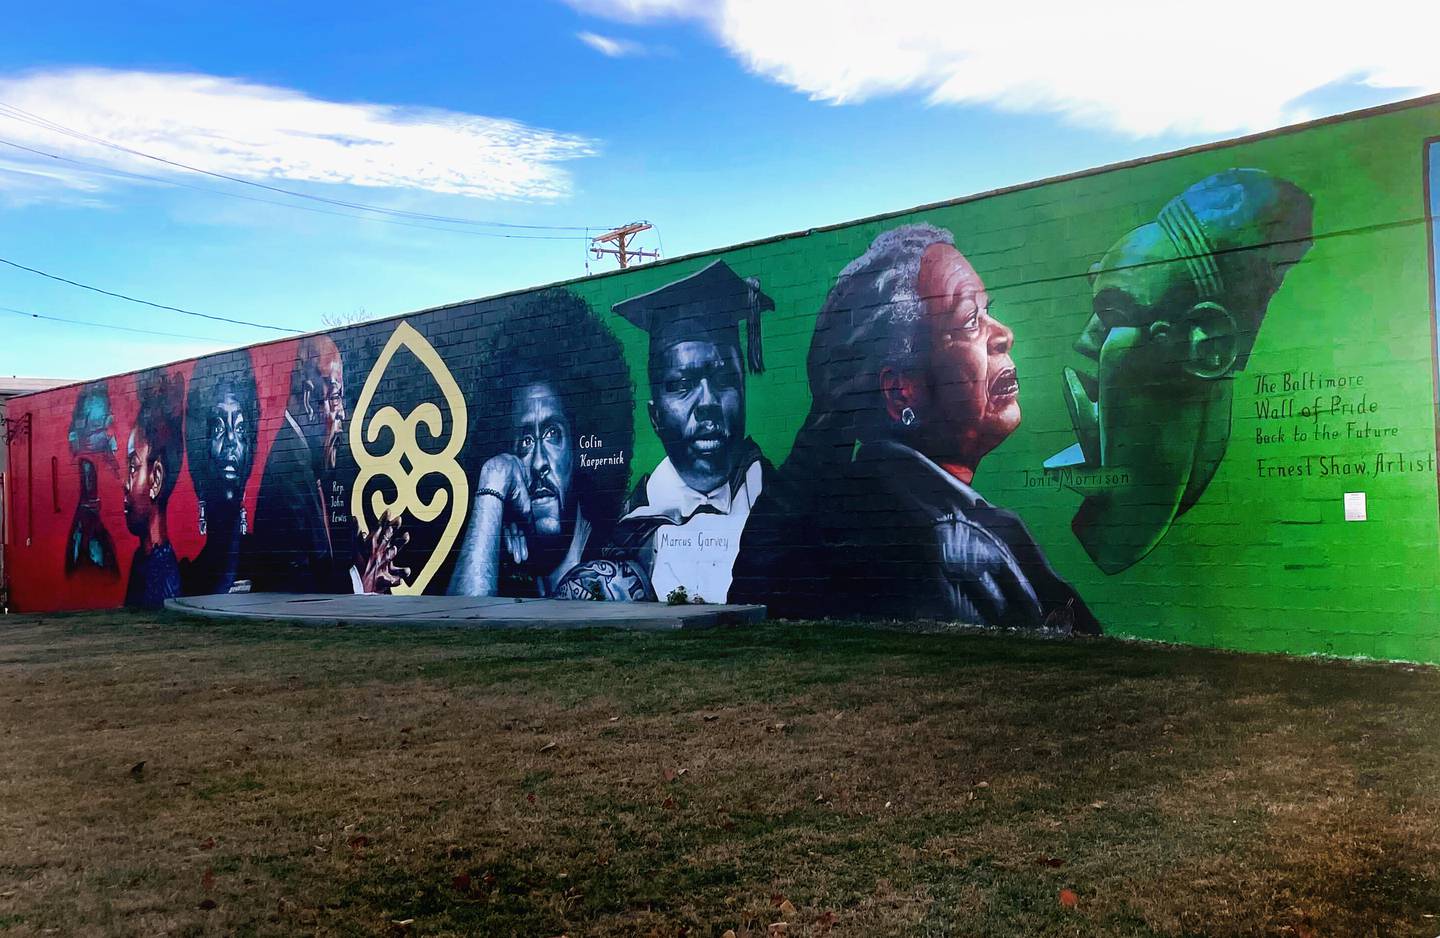 This is the Wall of Pride, 1601 Carey Street in Sandtown-Winchester by Ernest Shaw. The mural is a continuation of the work of late artist Pontella Mason, responsible for more than 30 pieces of public art in Baltimore City.